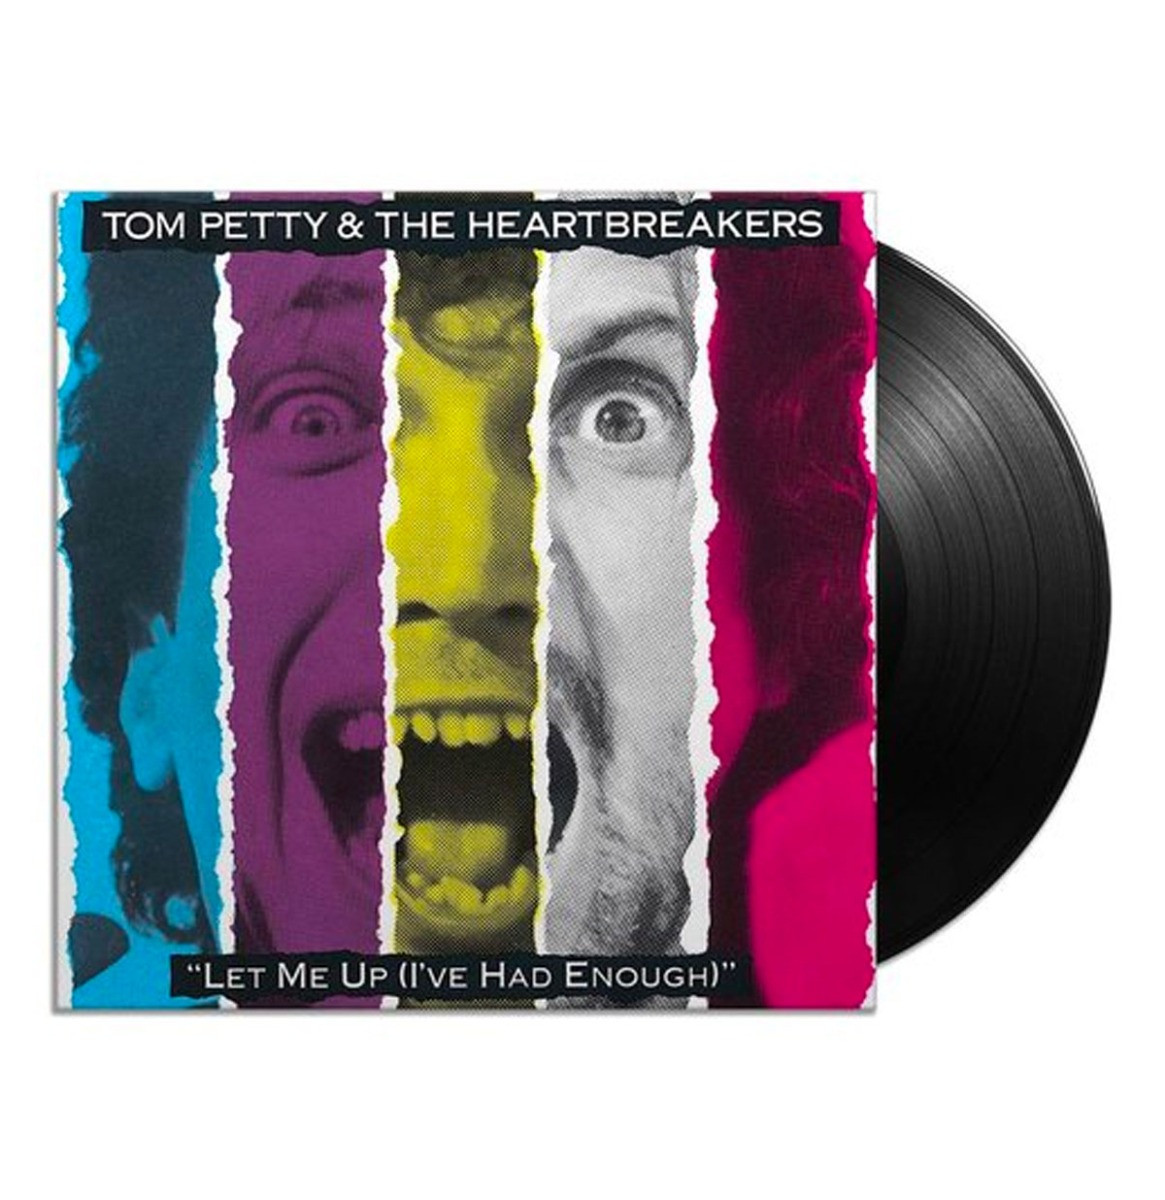 Tom Petty & The Heartbreakers - "Let Me Up (I&apos;ve Had Enough)" LP